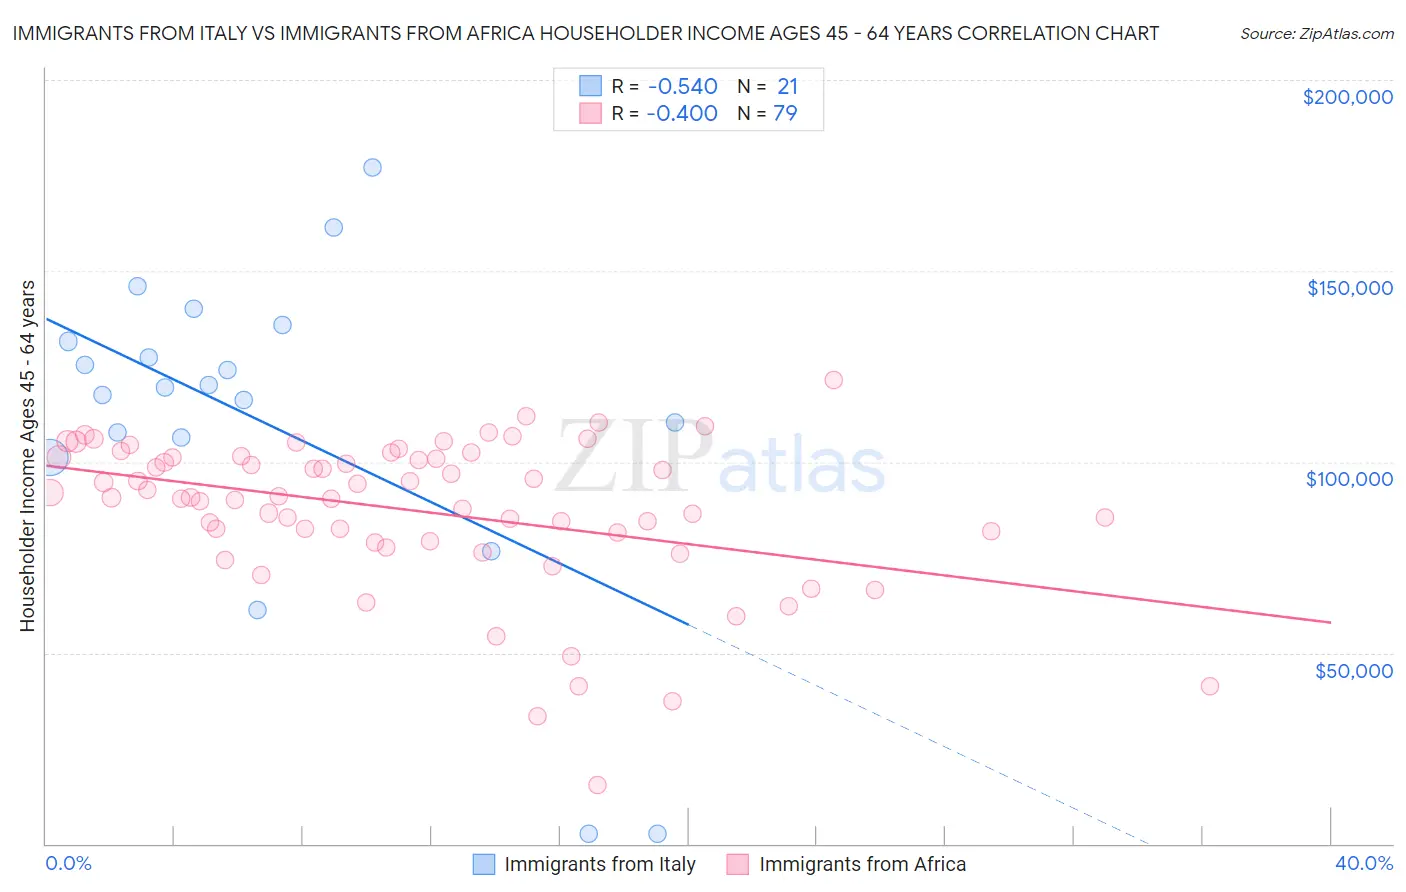 Immigrants from Italy vs Immigrants from Africa Householder Income Ages 45 - 64 years